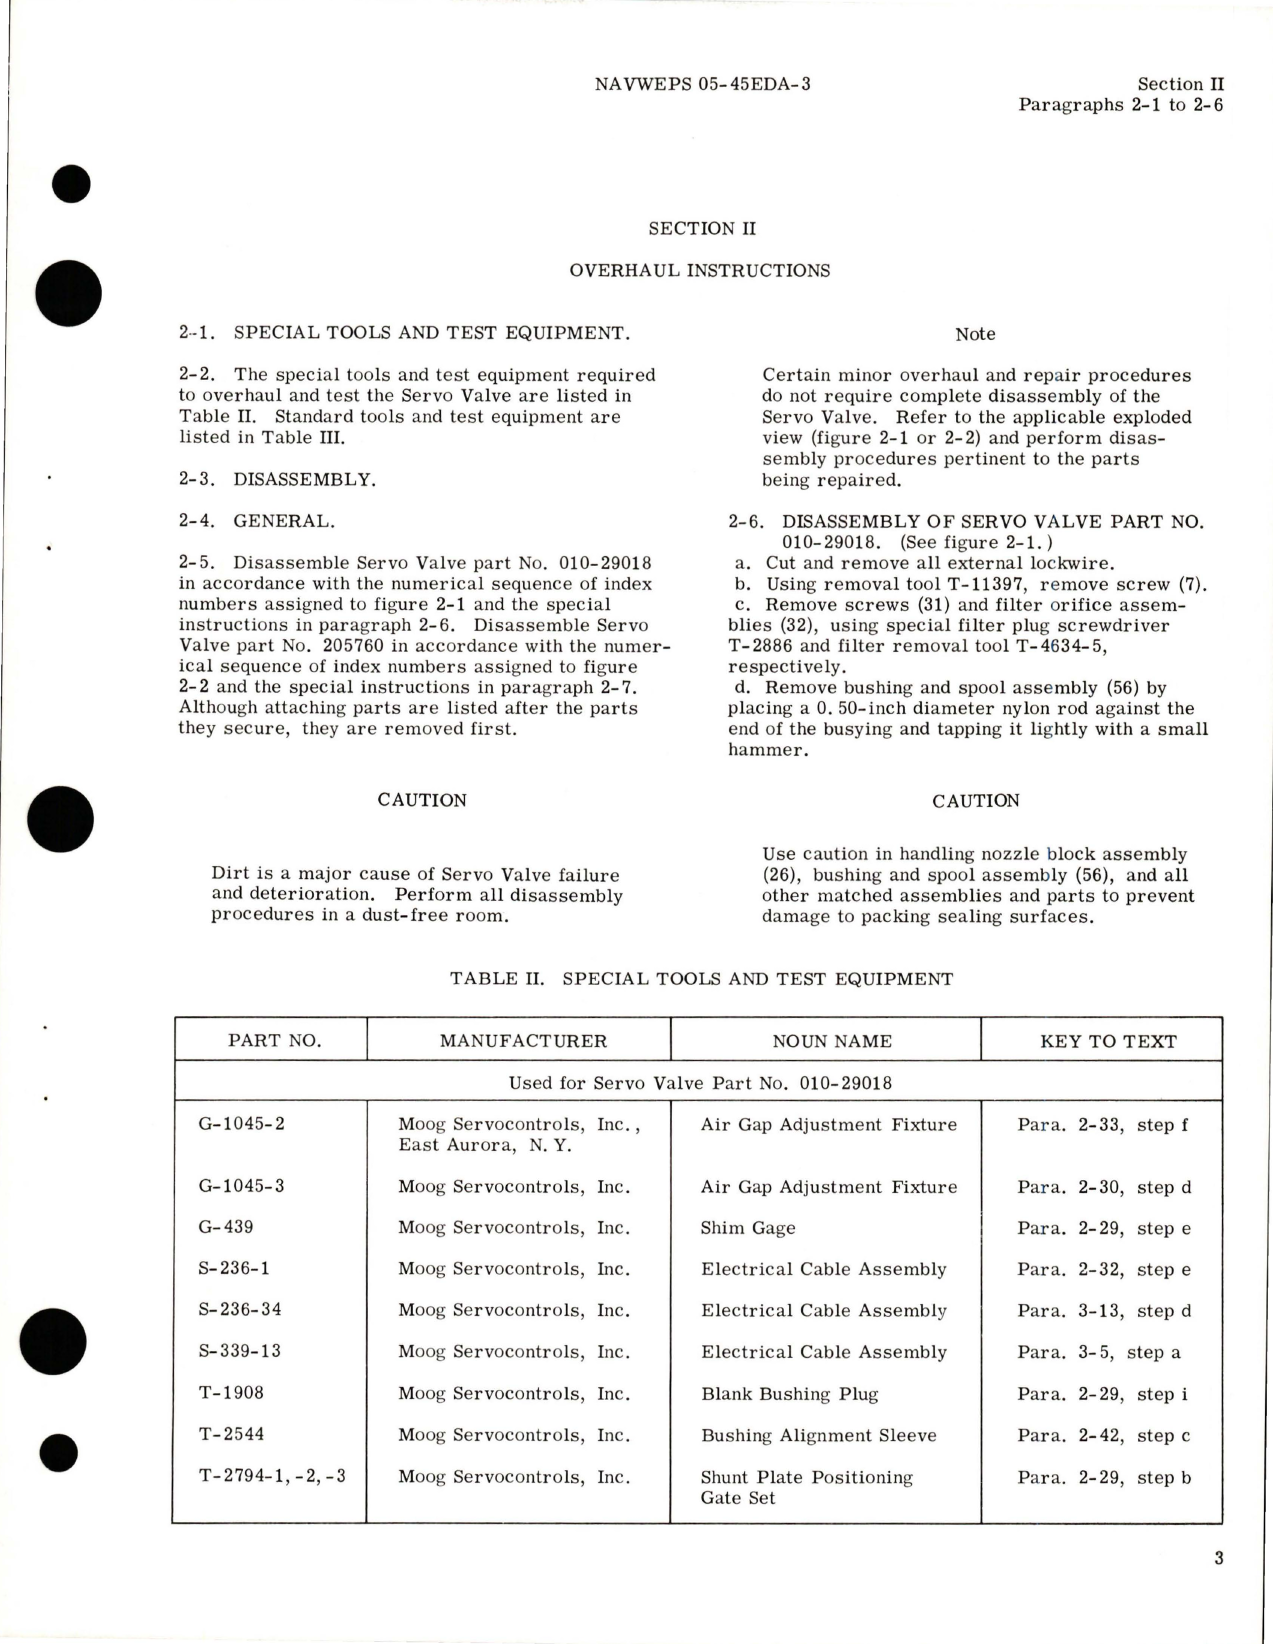 Sample page 7 from AirCorps Library document: Overhaul Instructions for Hydraulic Servo Control Valve - Part 1300563-1 